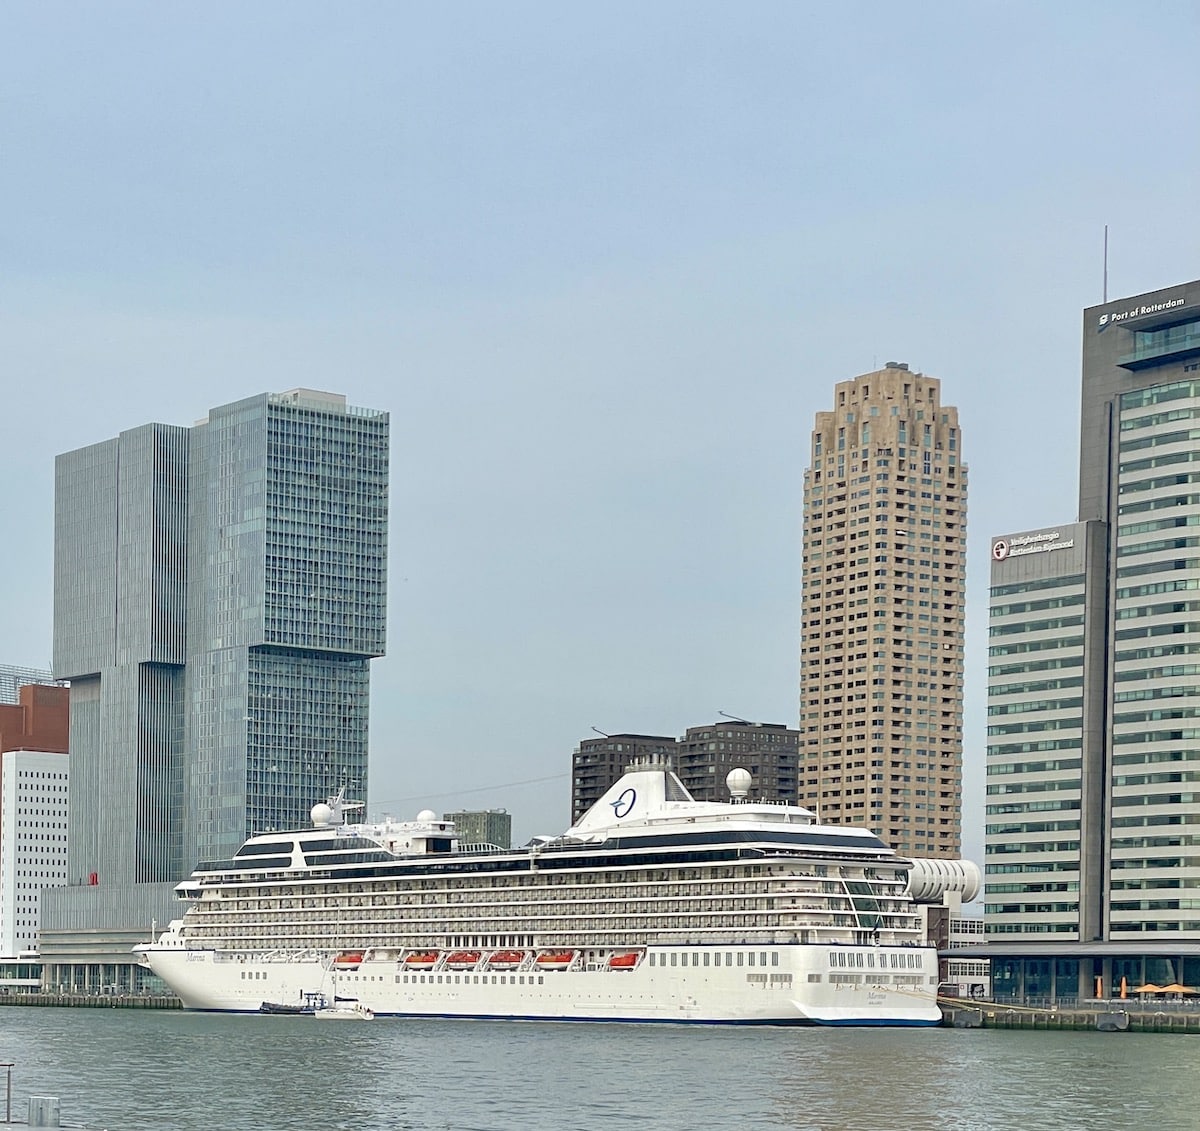 Oceania cruise ship docked in front of office buildings.